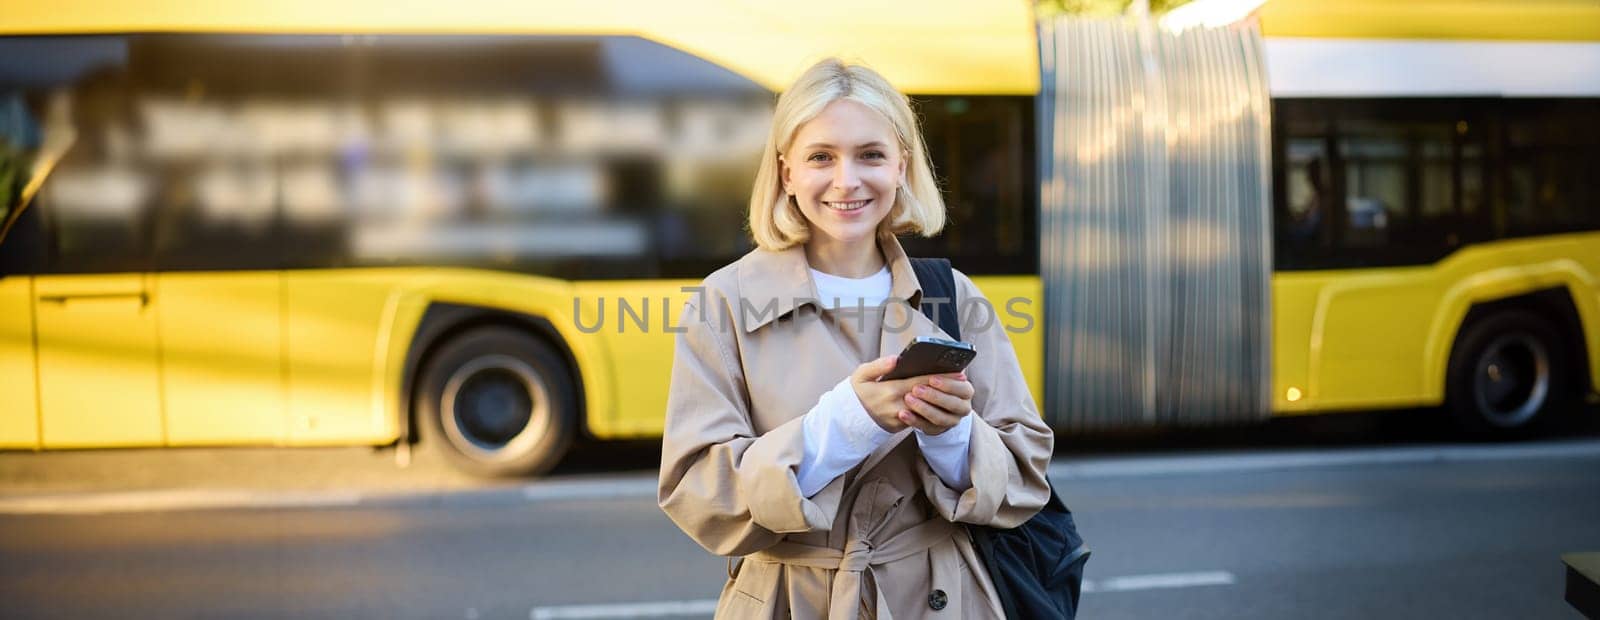 Outdoor shot of young woman with backpack, standing on street with cars passing behind her, holding mobile phone and smiling, urban lifestyle concept by Benzoix